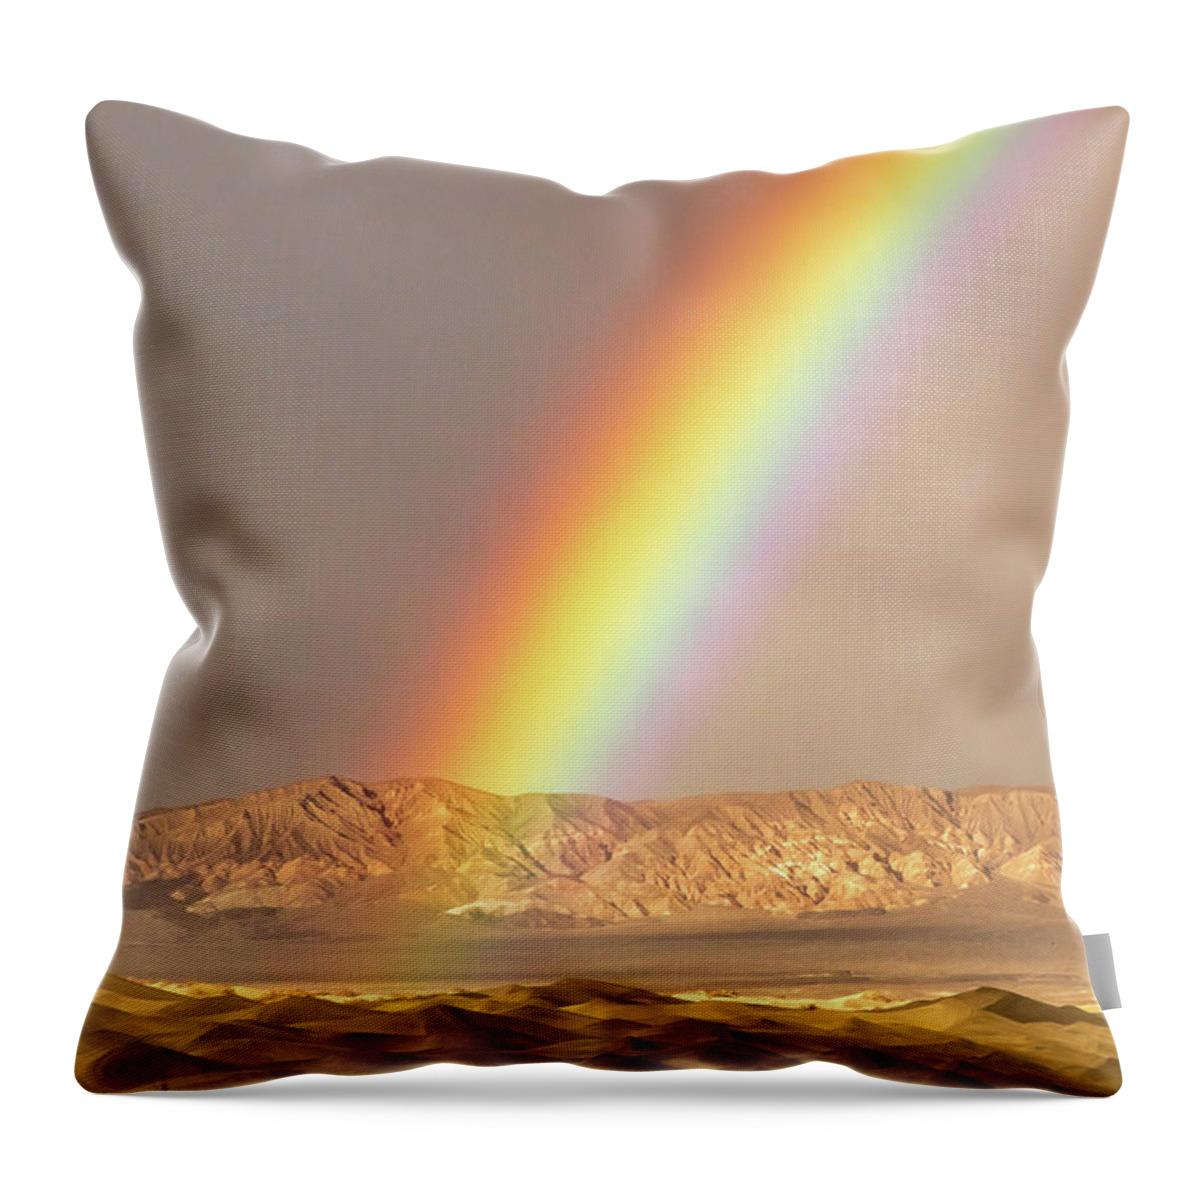 Death Valley National Park Throw Pillow featuring the photograph Rainbow Over Mesquite Dunes by Bill Gallagher